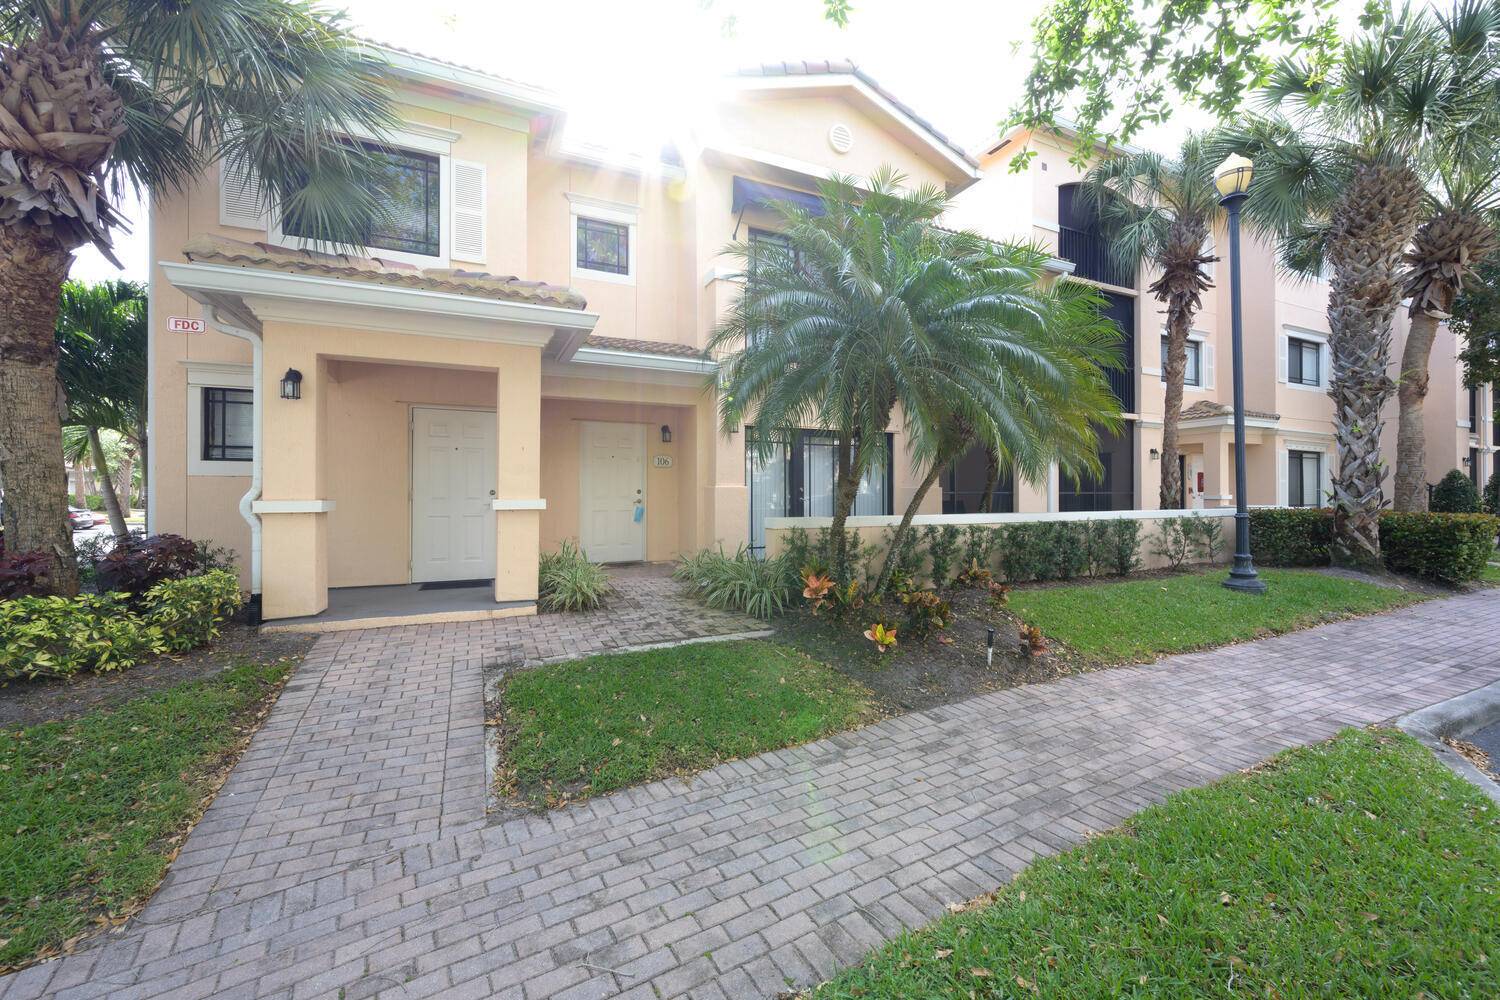 Welcome to the wonderful gated community of San Matera in the heart of Palm Beach Gardens.